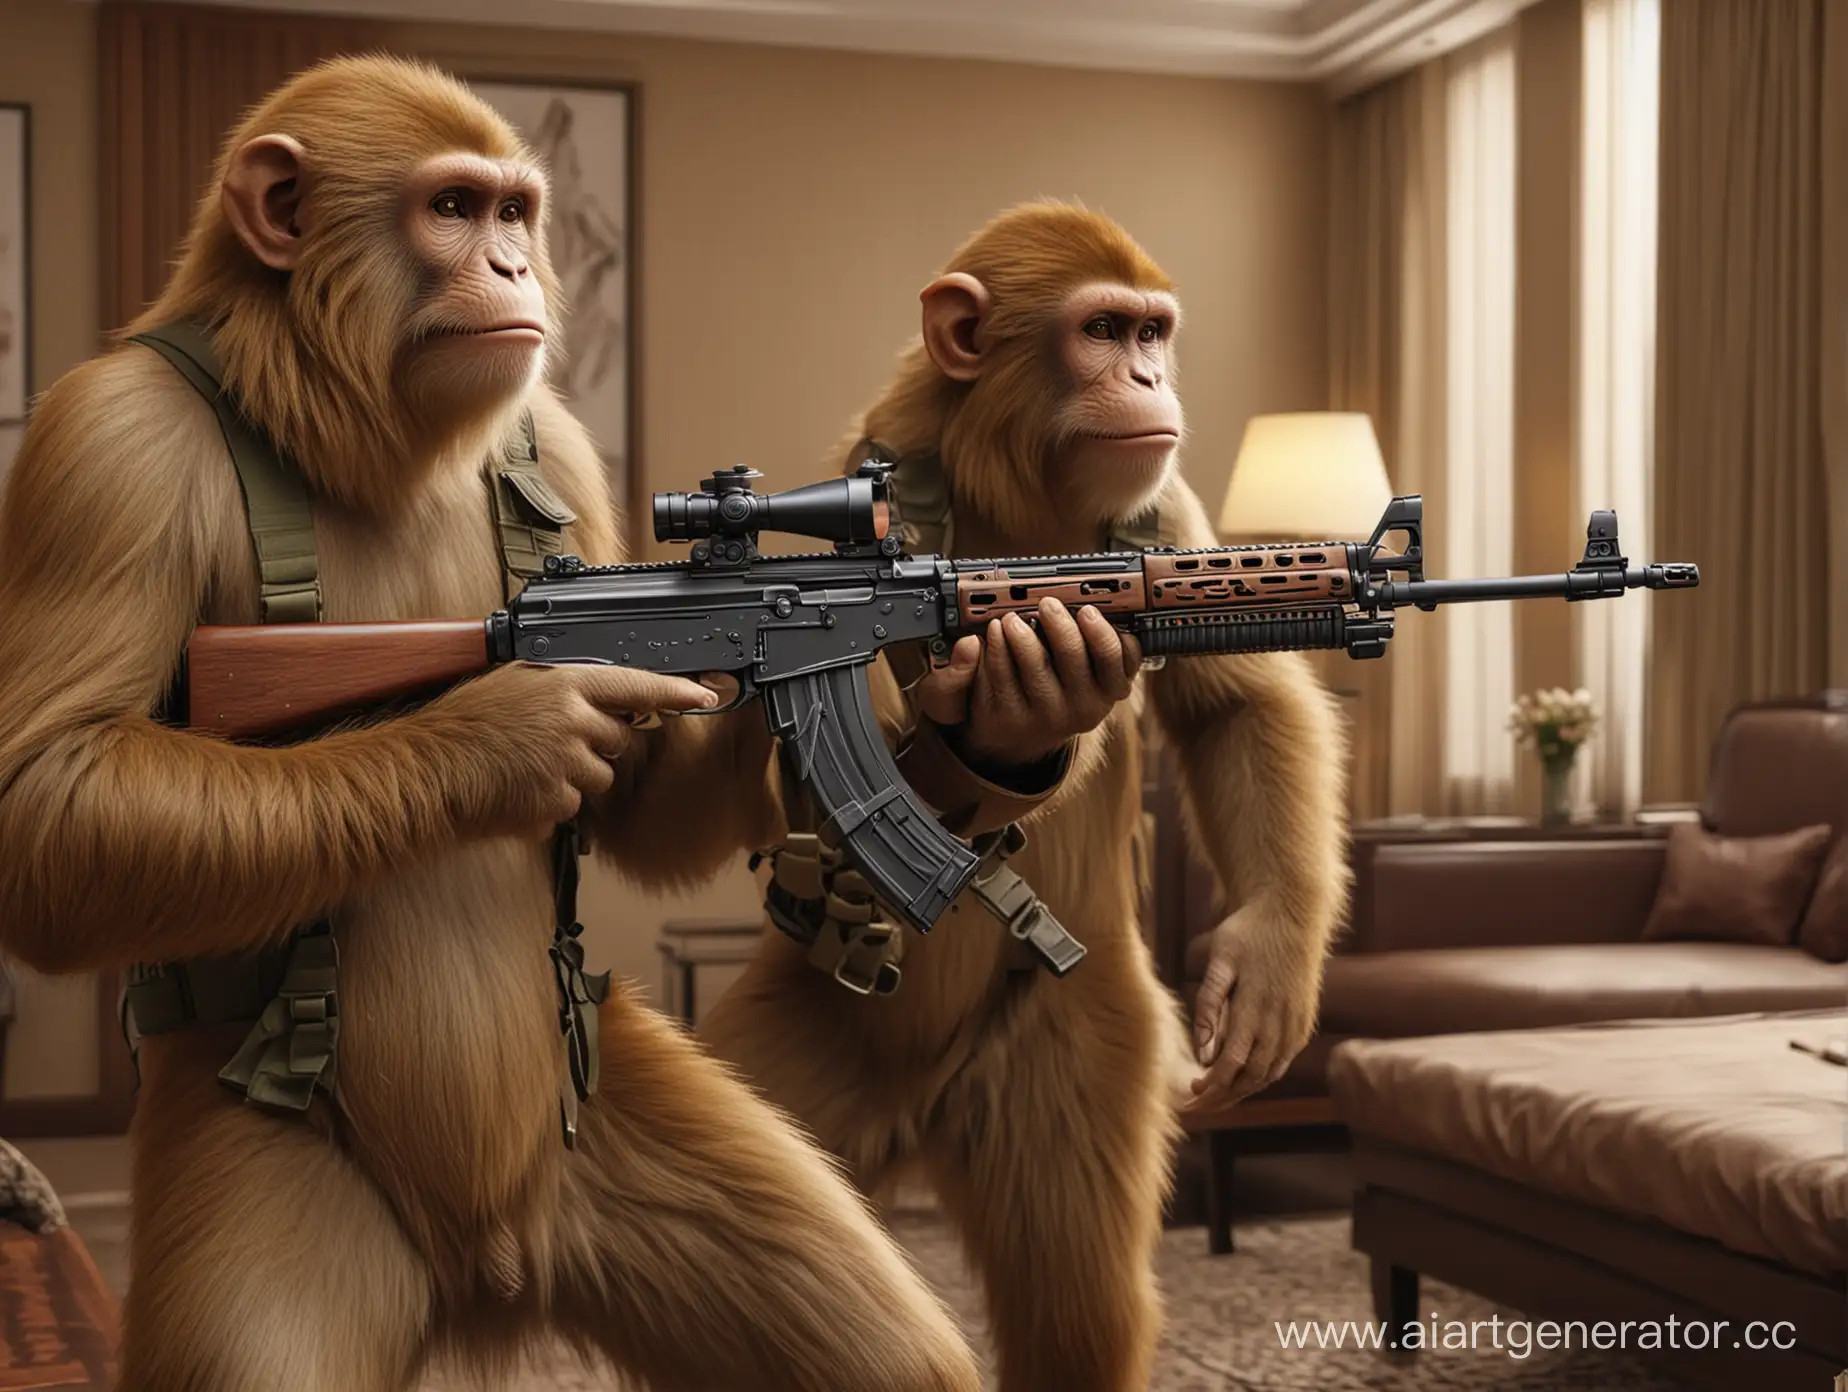 2 monkey , classic wear , grab a weapons : AK rifle and AR rifle , Realistic , 4k , HD . Background is room in Asian hotel .